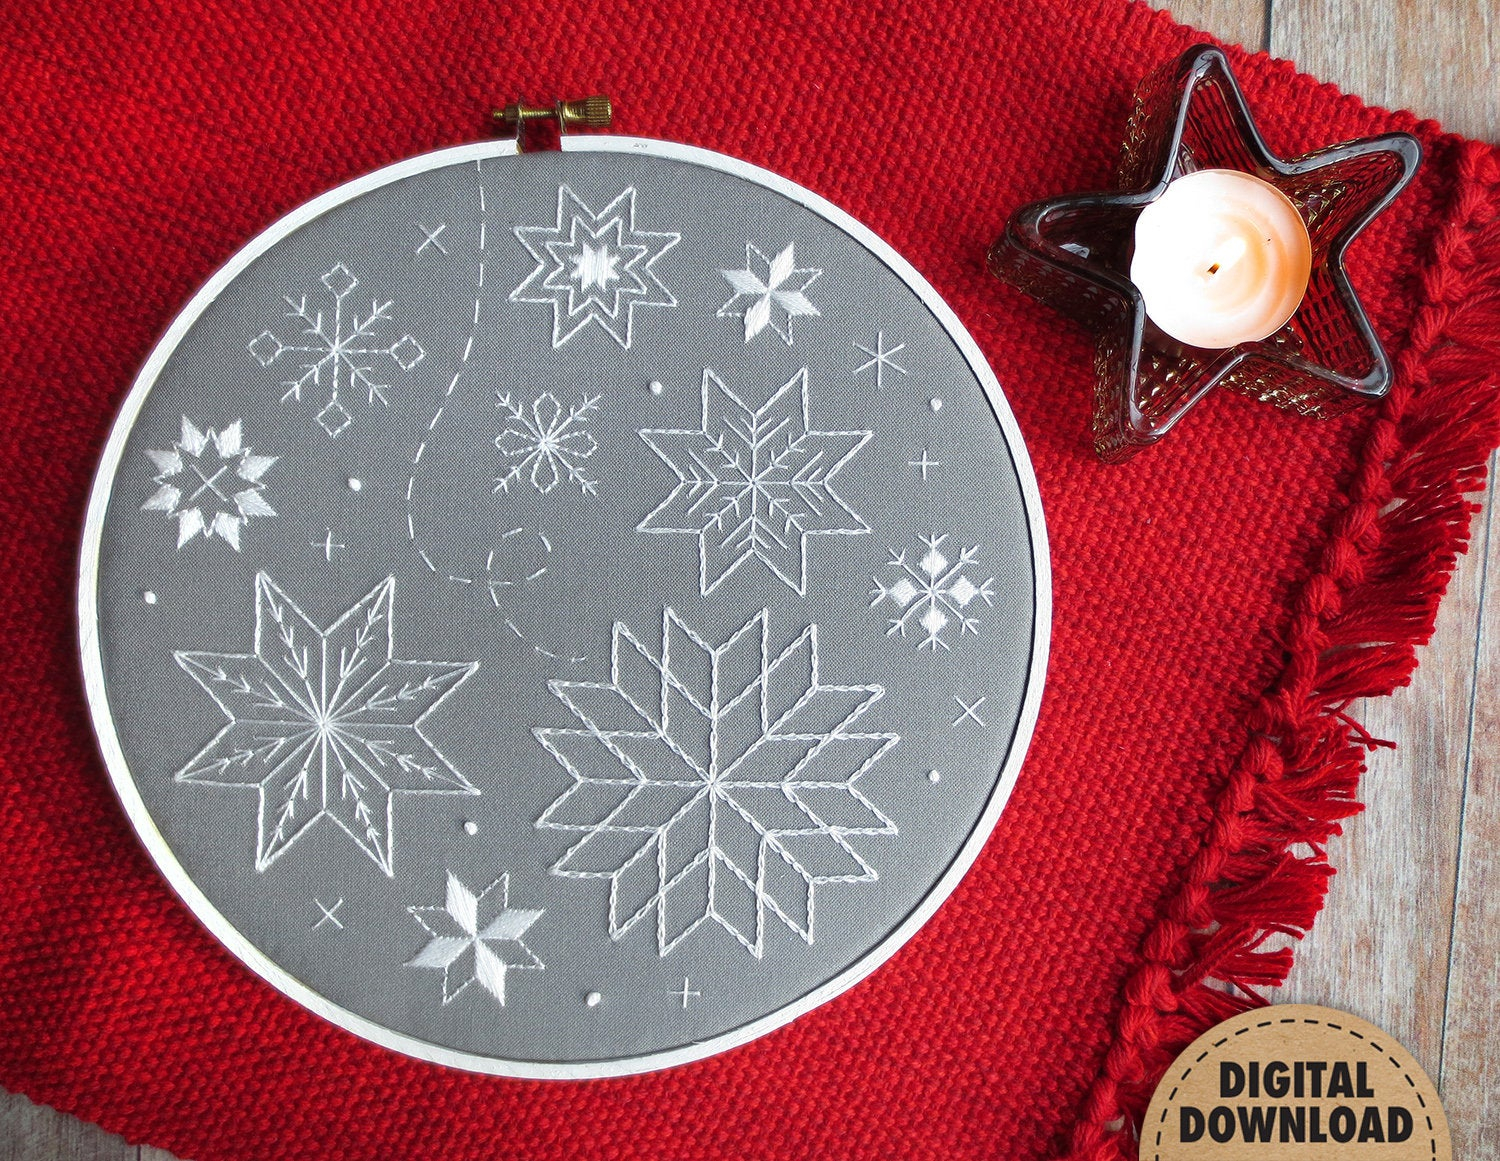 Snowflake Embroidery Pattern Snowflake Embroidery Pattern Downloadable Pattern Snowflakes Winter Decor Stitch Sampler Hand Embroidery Pattern Neutral Christmas